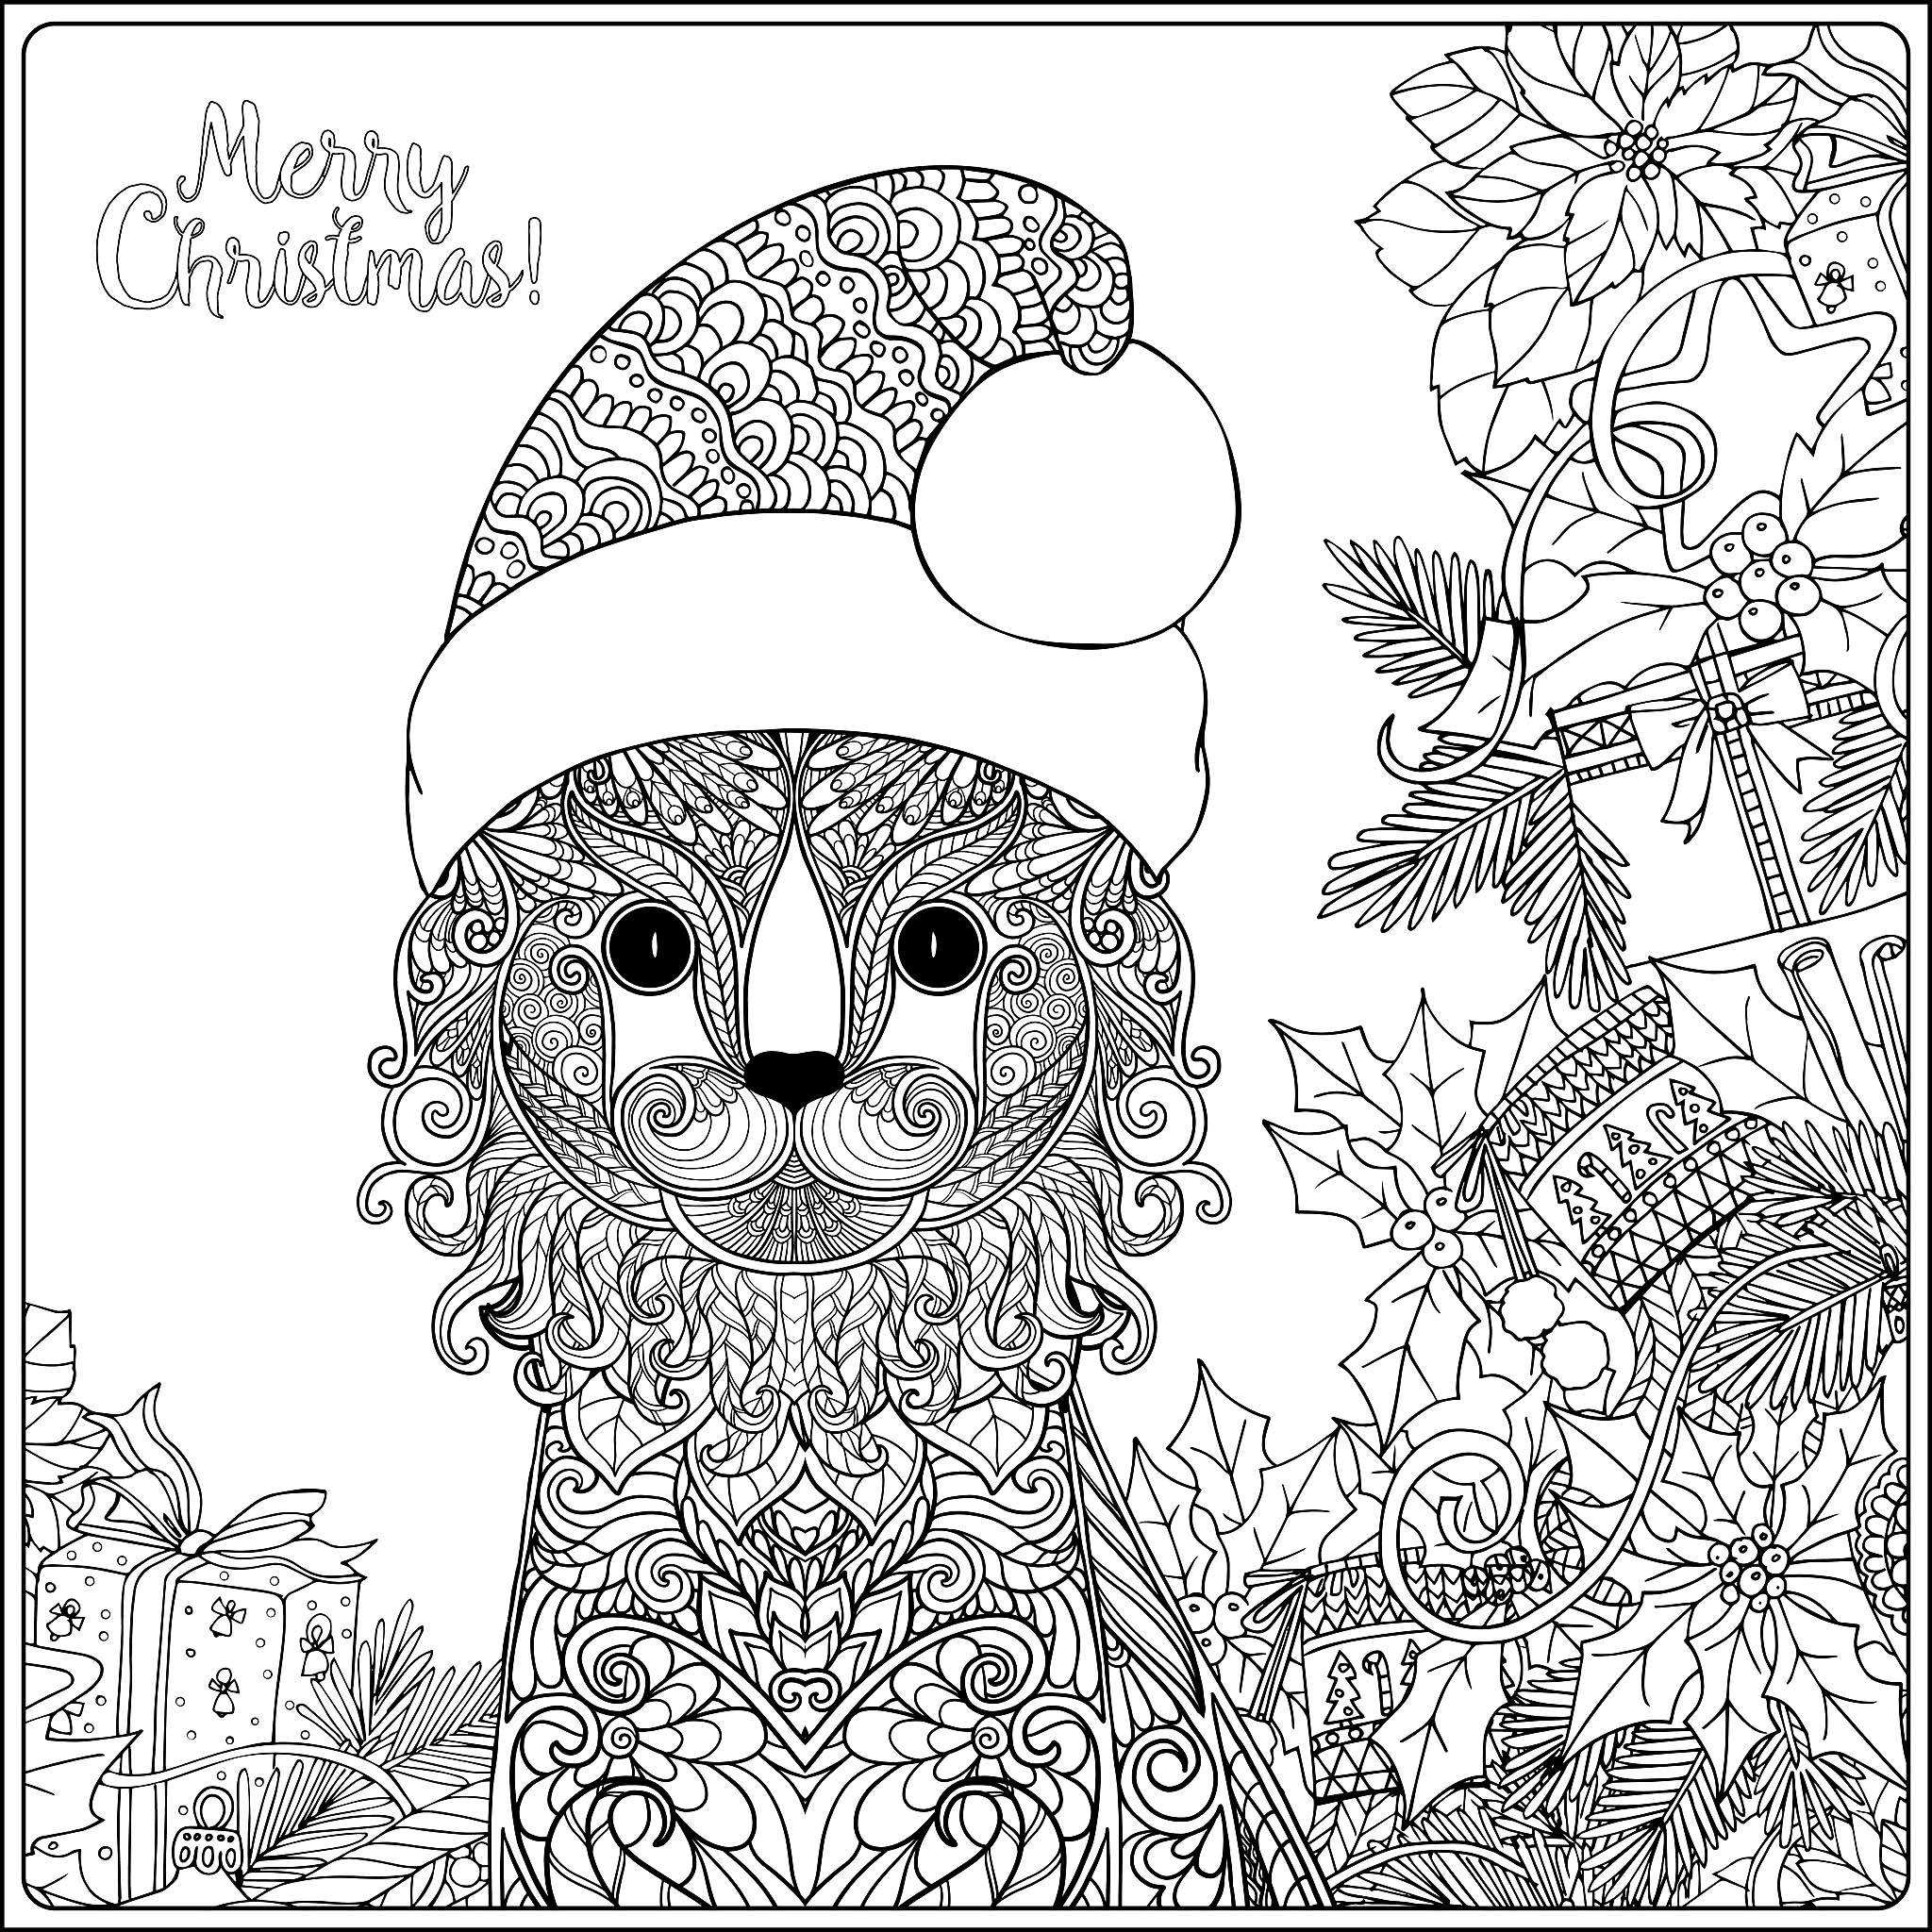 A squared coloring page with a cute Christmas cat, full of elegant paterns. The text 'Merry Christmas' can be colored, and also all the leaves, gifts and ornaments, Source : 123rf   Artist : Elena Besedina